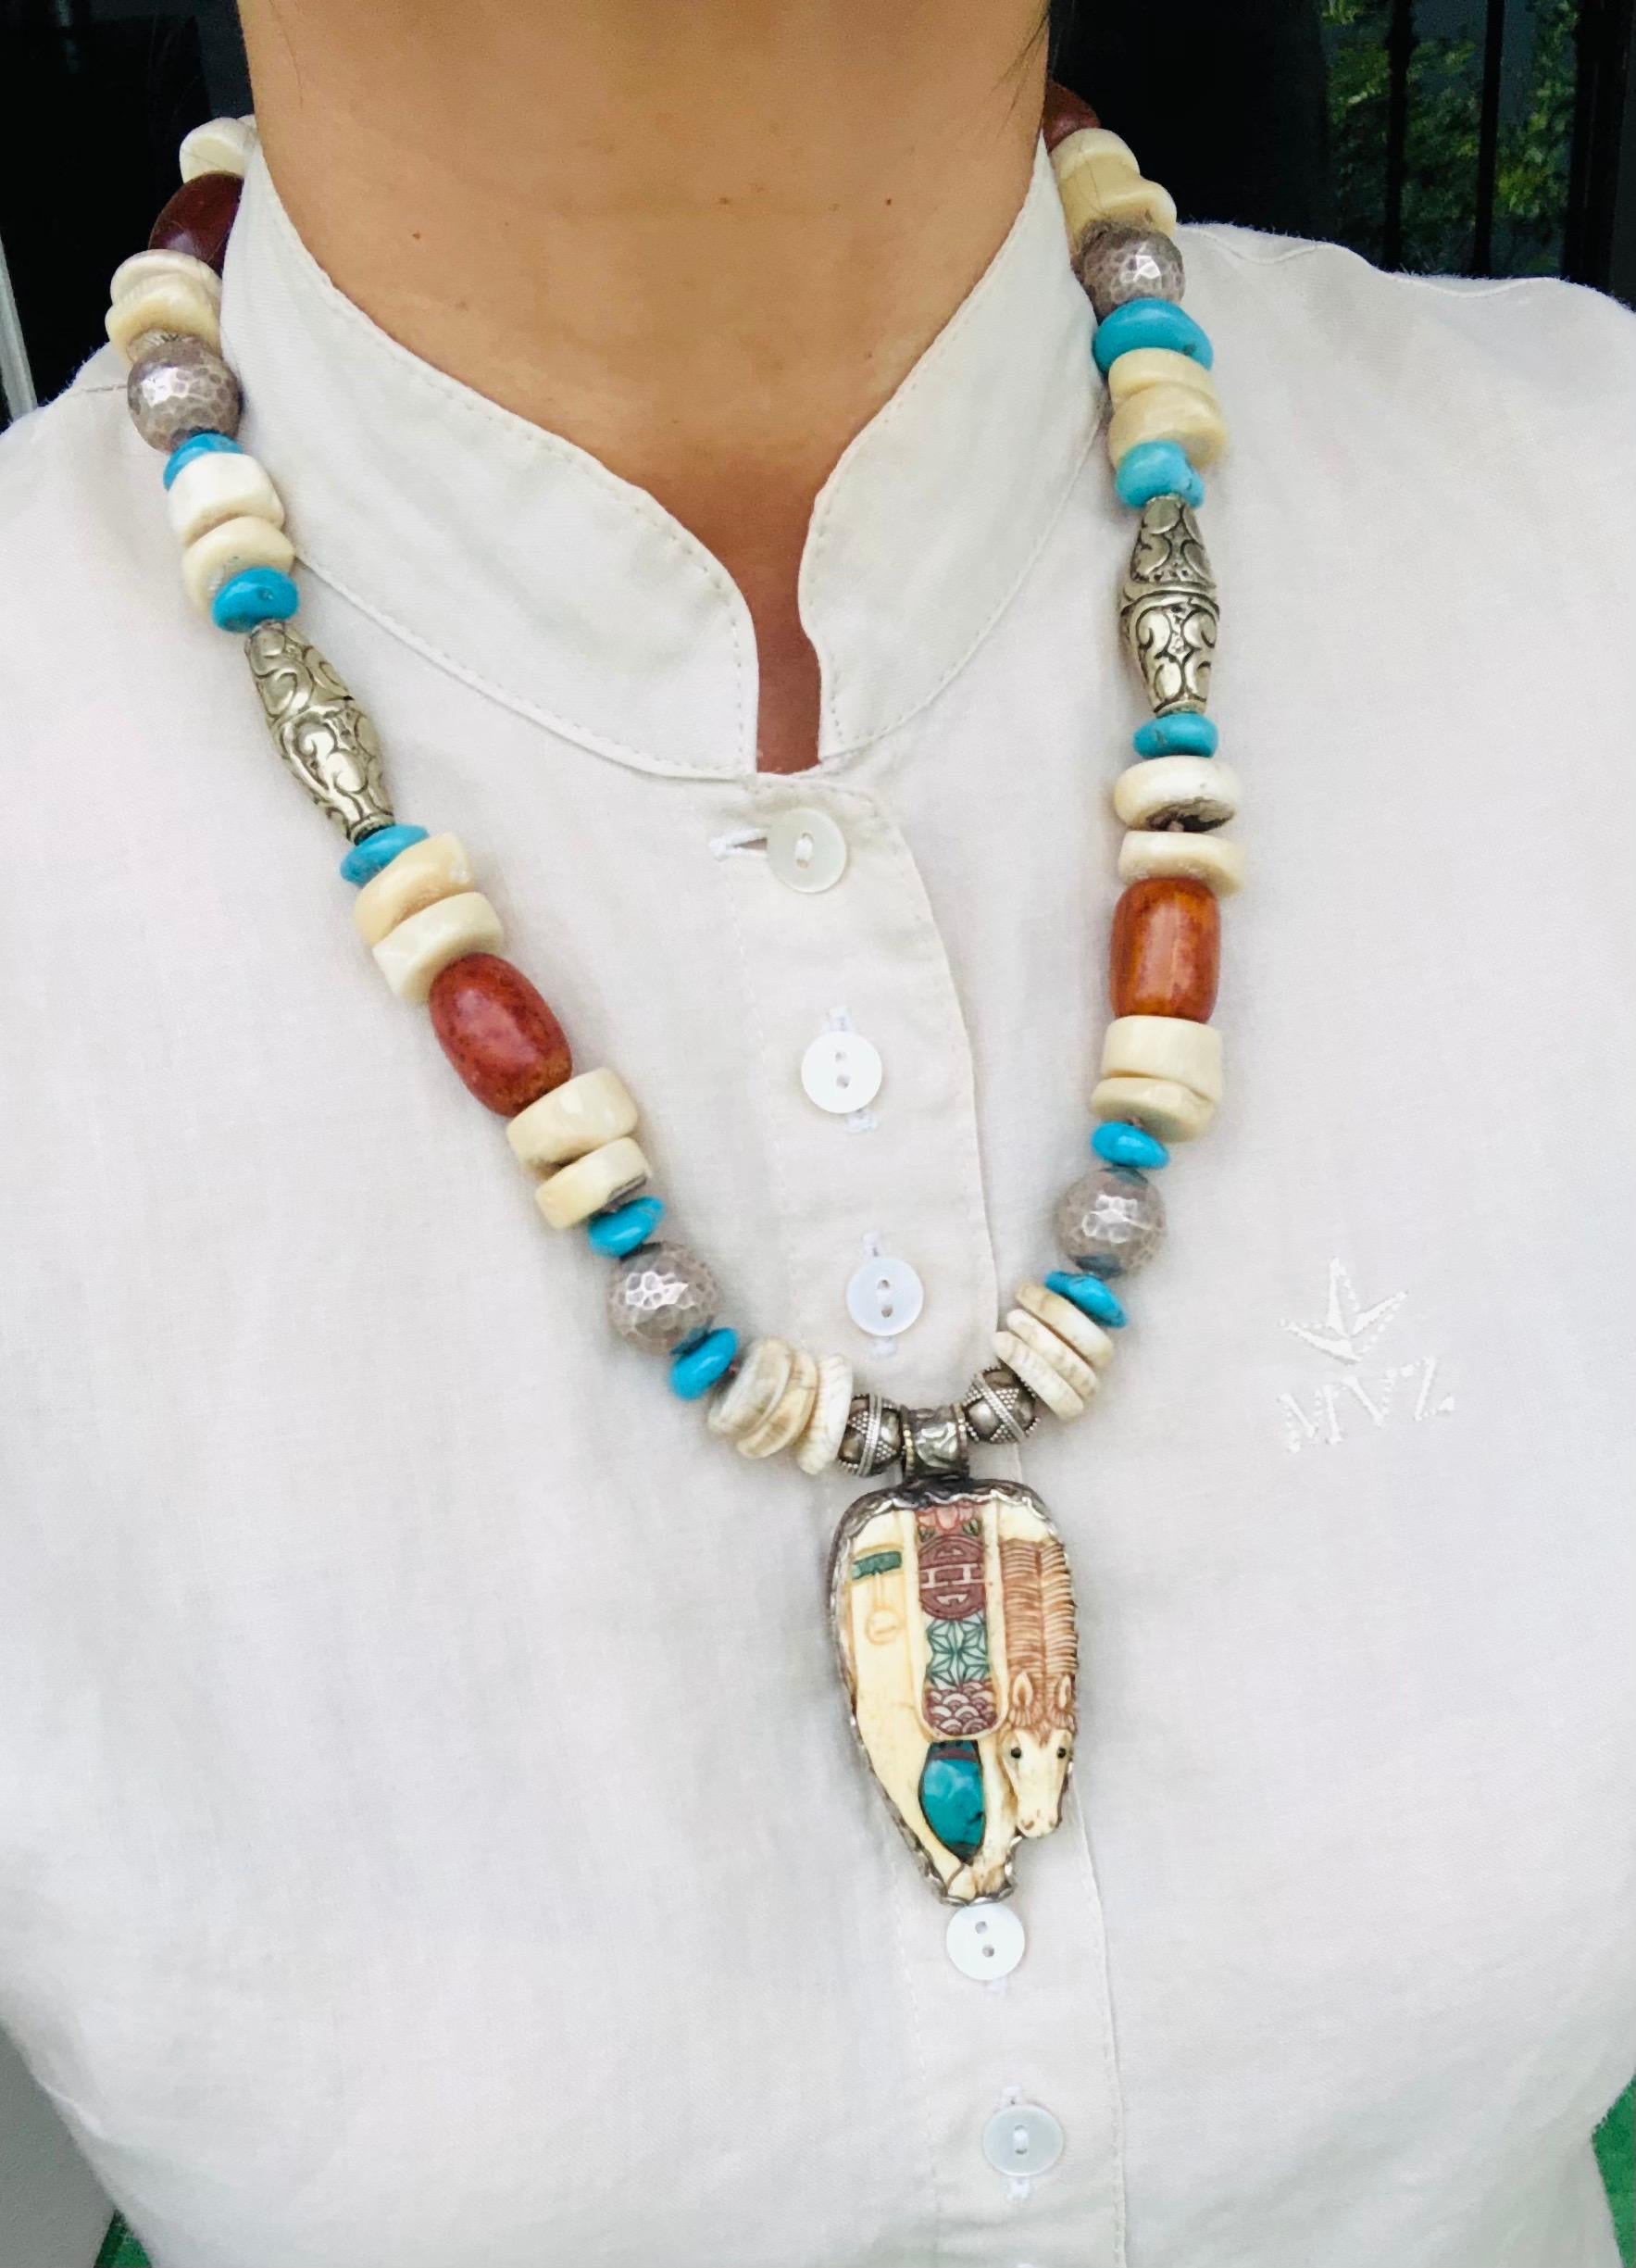 One-of-a-Kind
This is a beautifully elegant Necklace, carved bone Horse pendant hand-painted with Turquoise Wrapped in Sterling Silver. Assorted beads, Amber, Sea Bamboo, Sterling Silver, Turquoise, and Tibetan Beads make a truly unique and precious